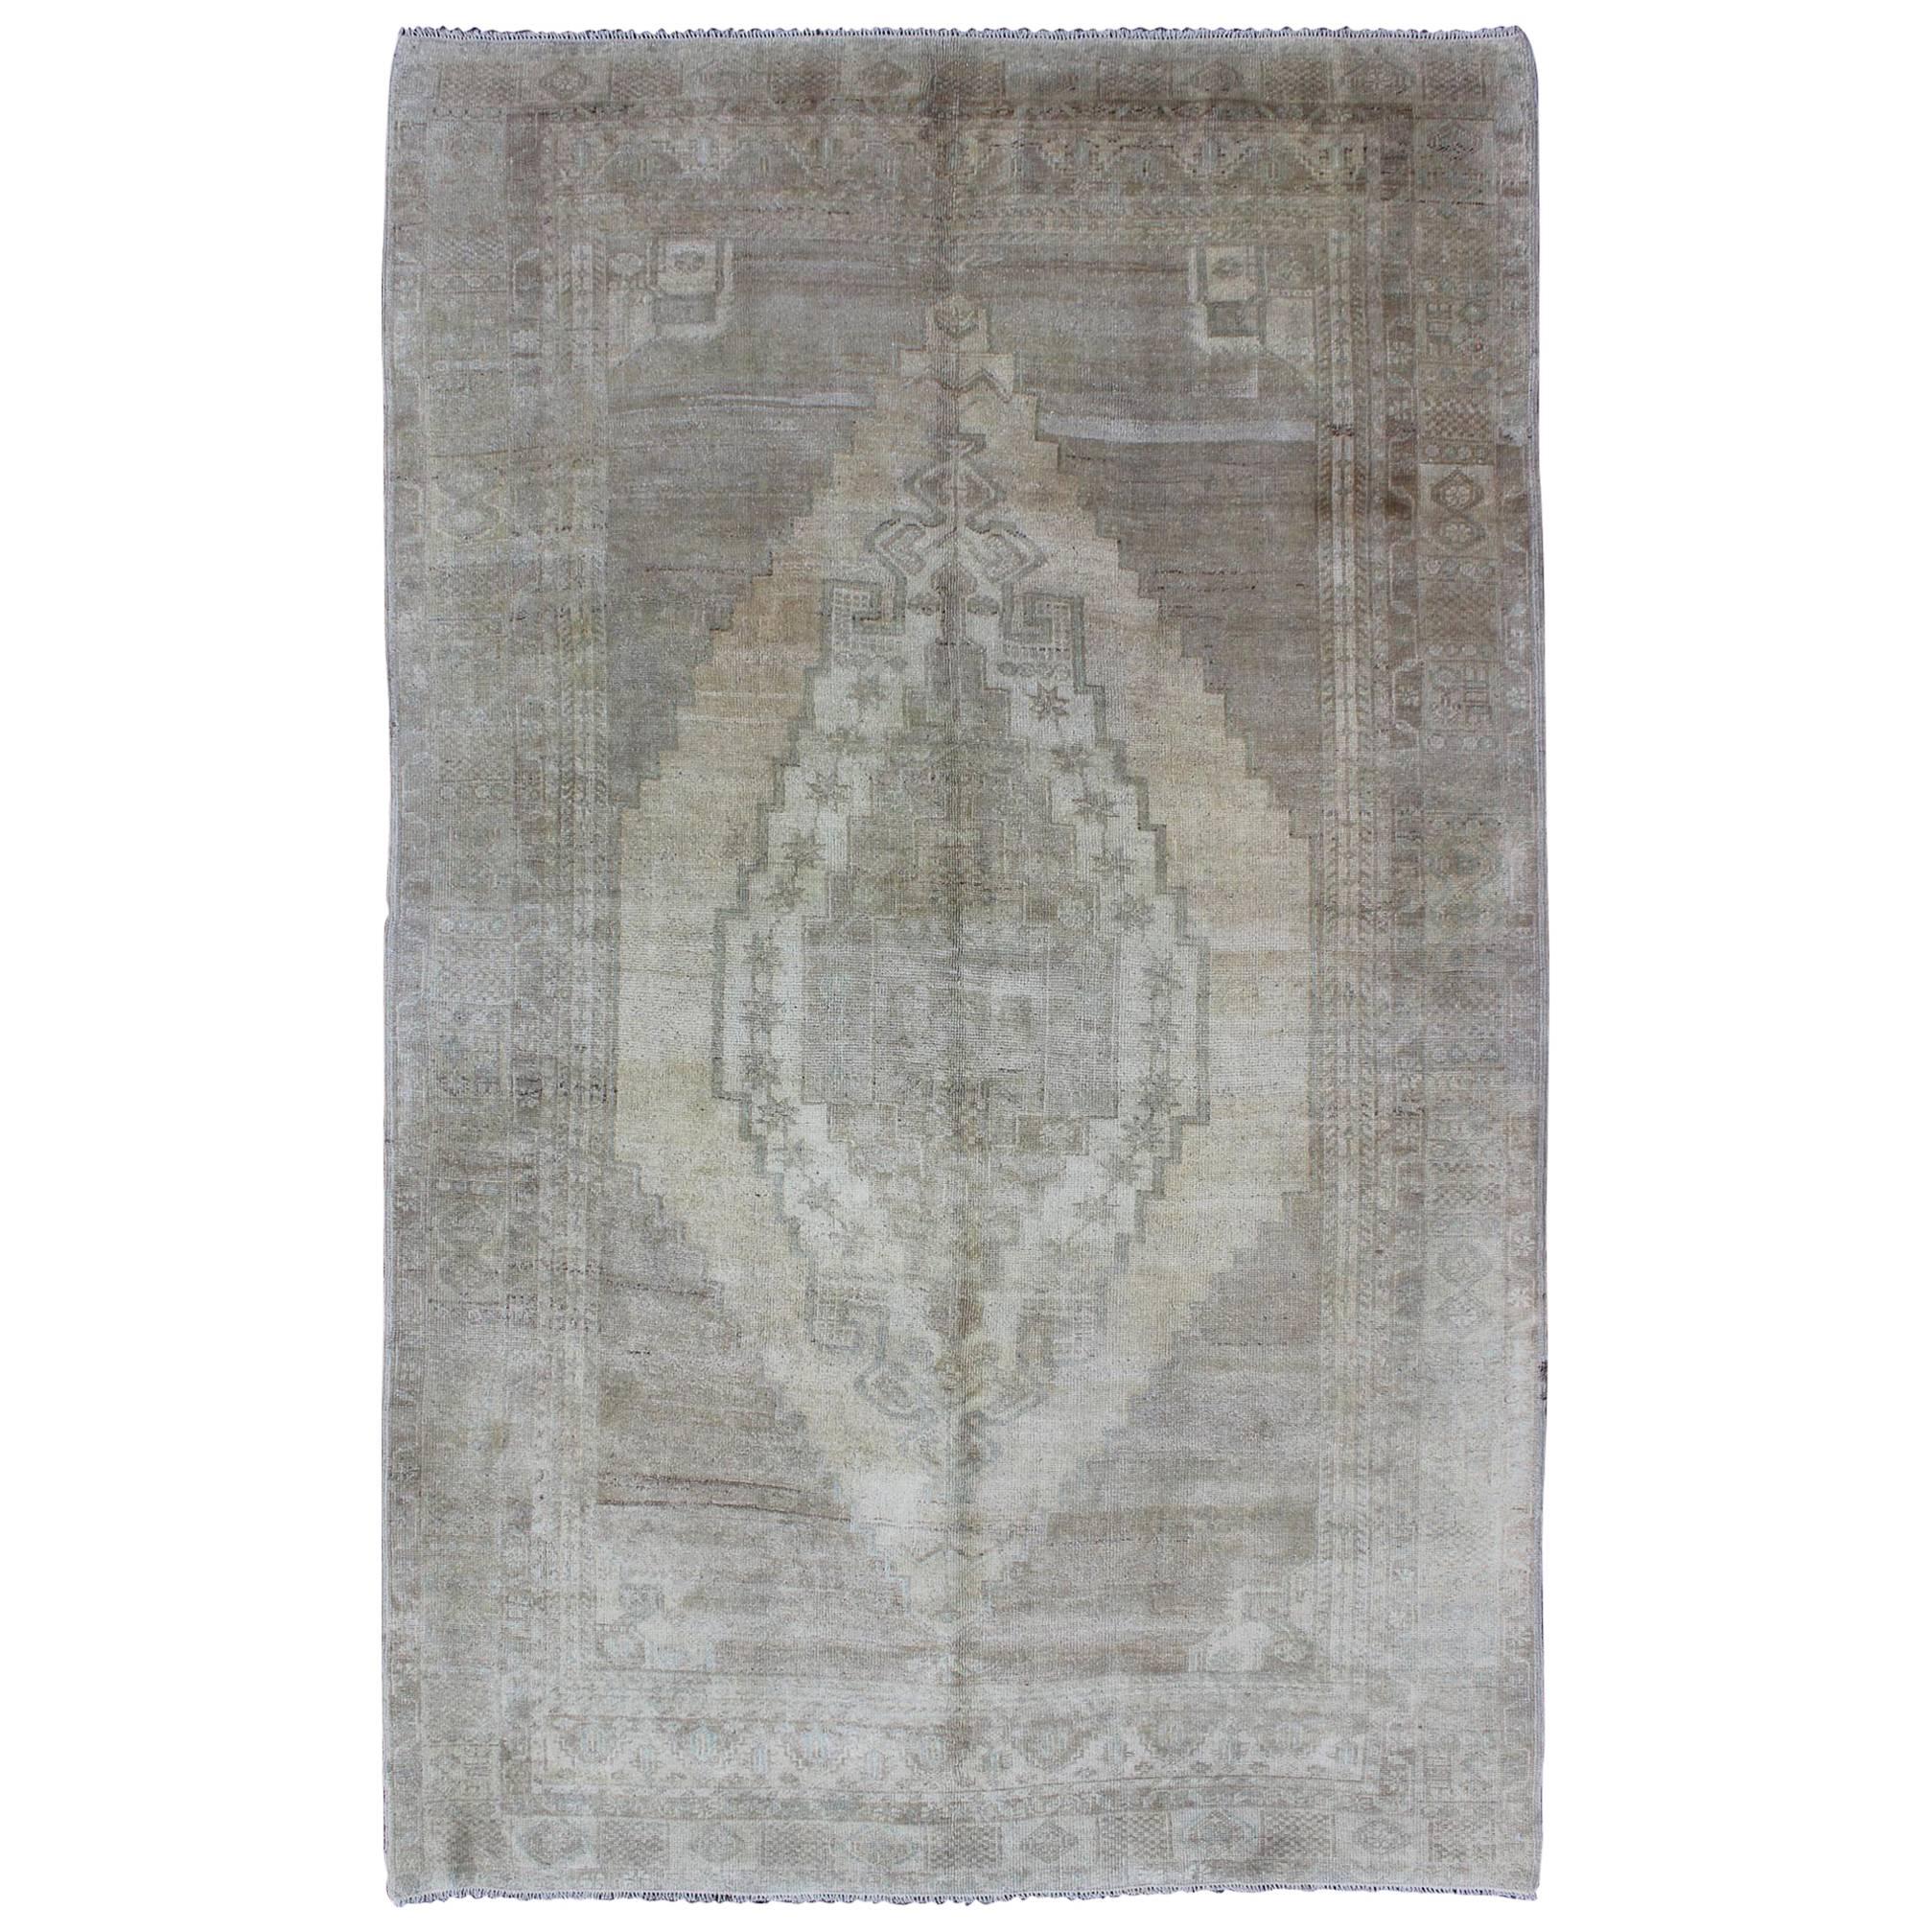 Shades of Gray Oushak Vintage Rug from Turkey with Layered Medallion